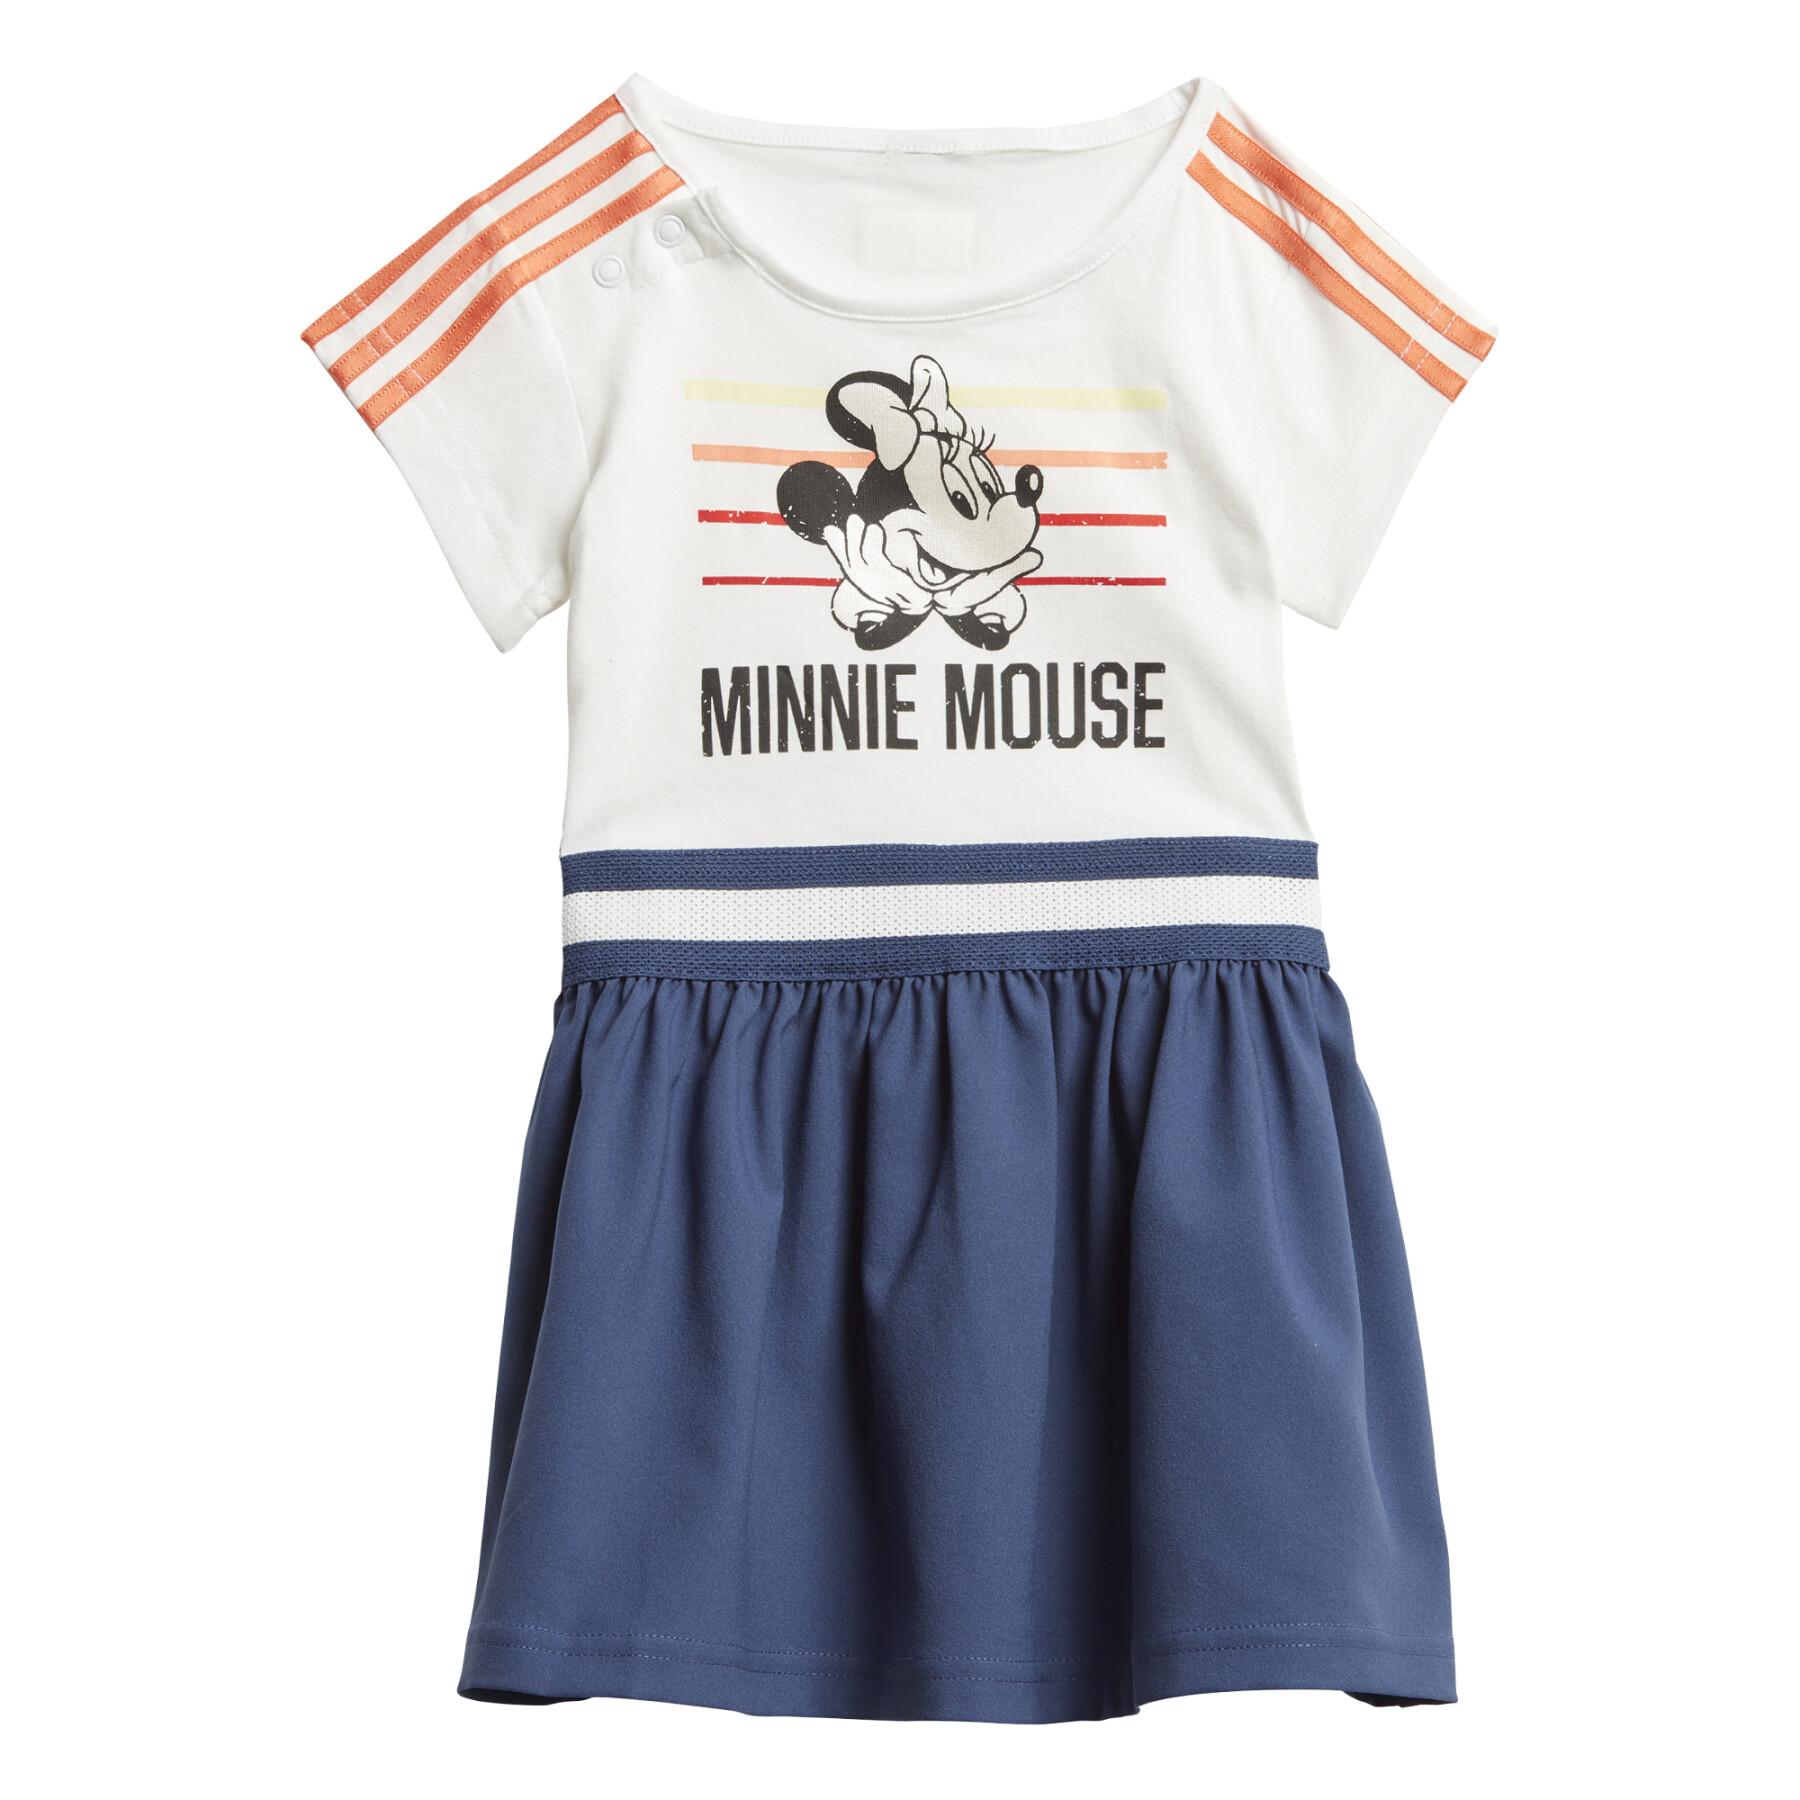 Baby-kit girl adidas Minnie Mouse Summer